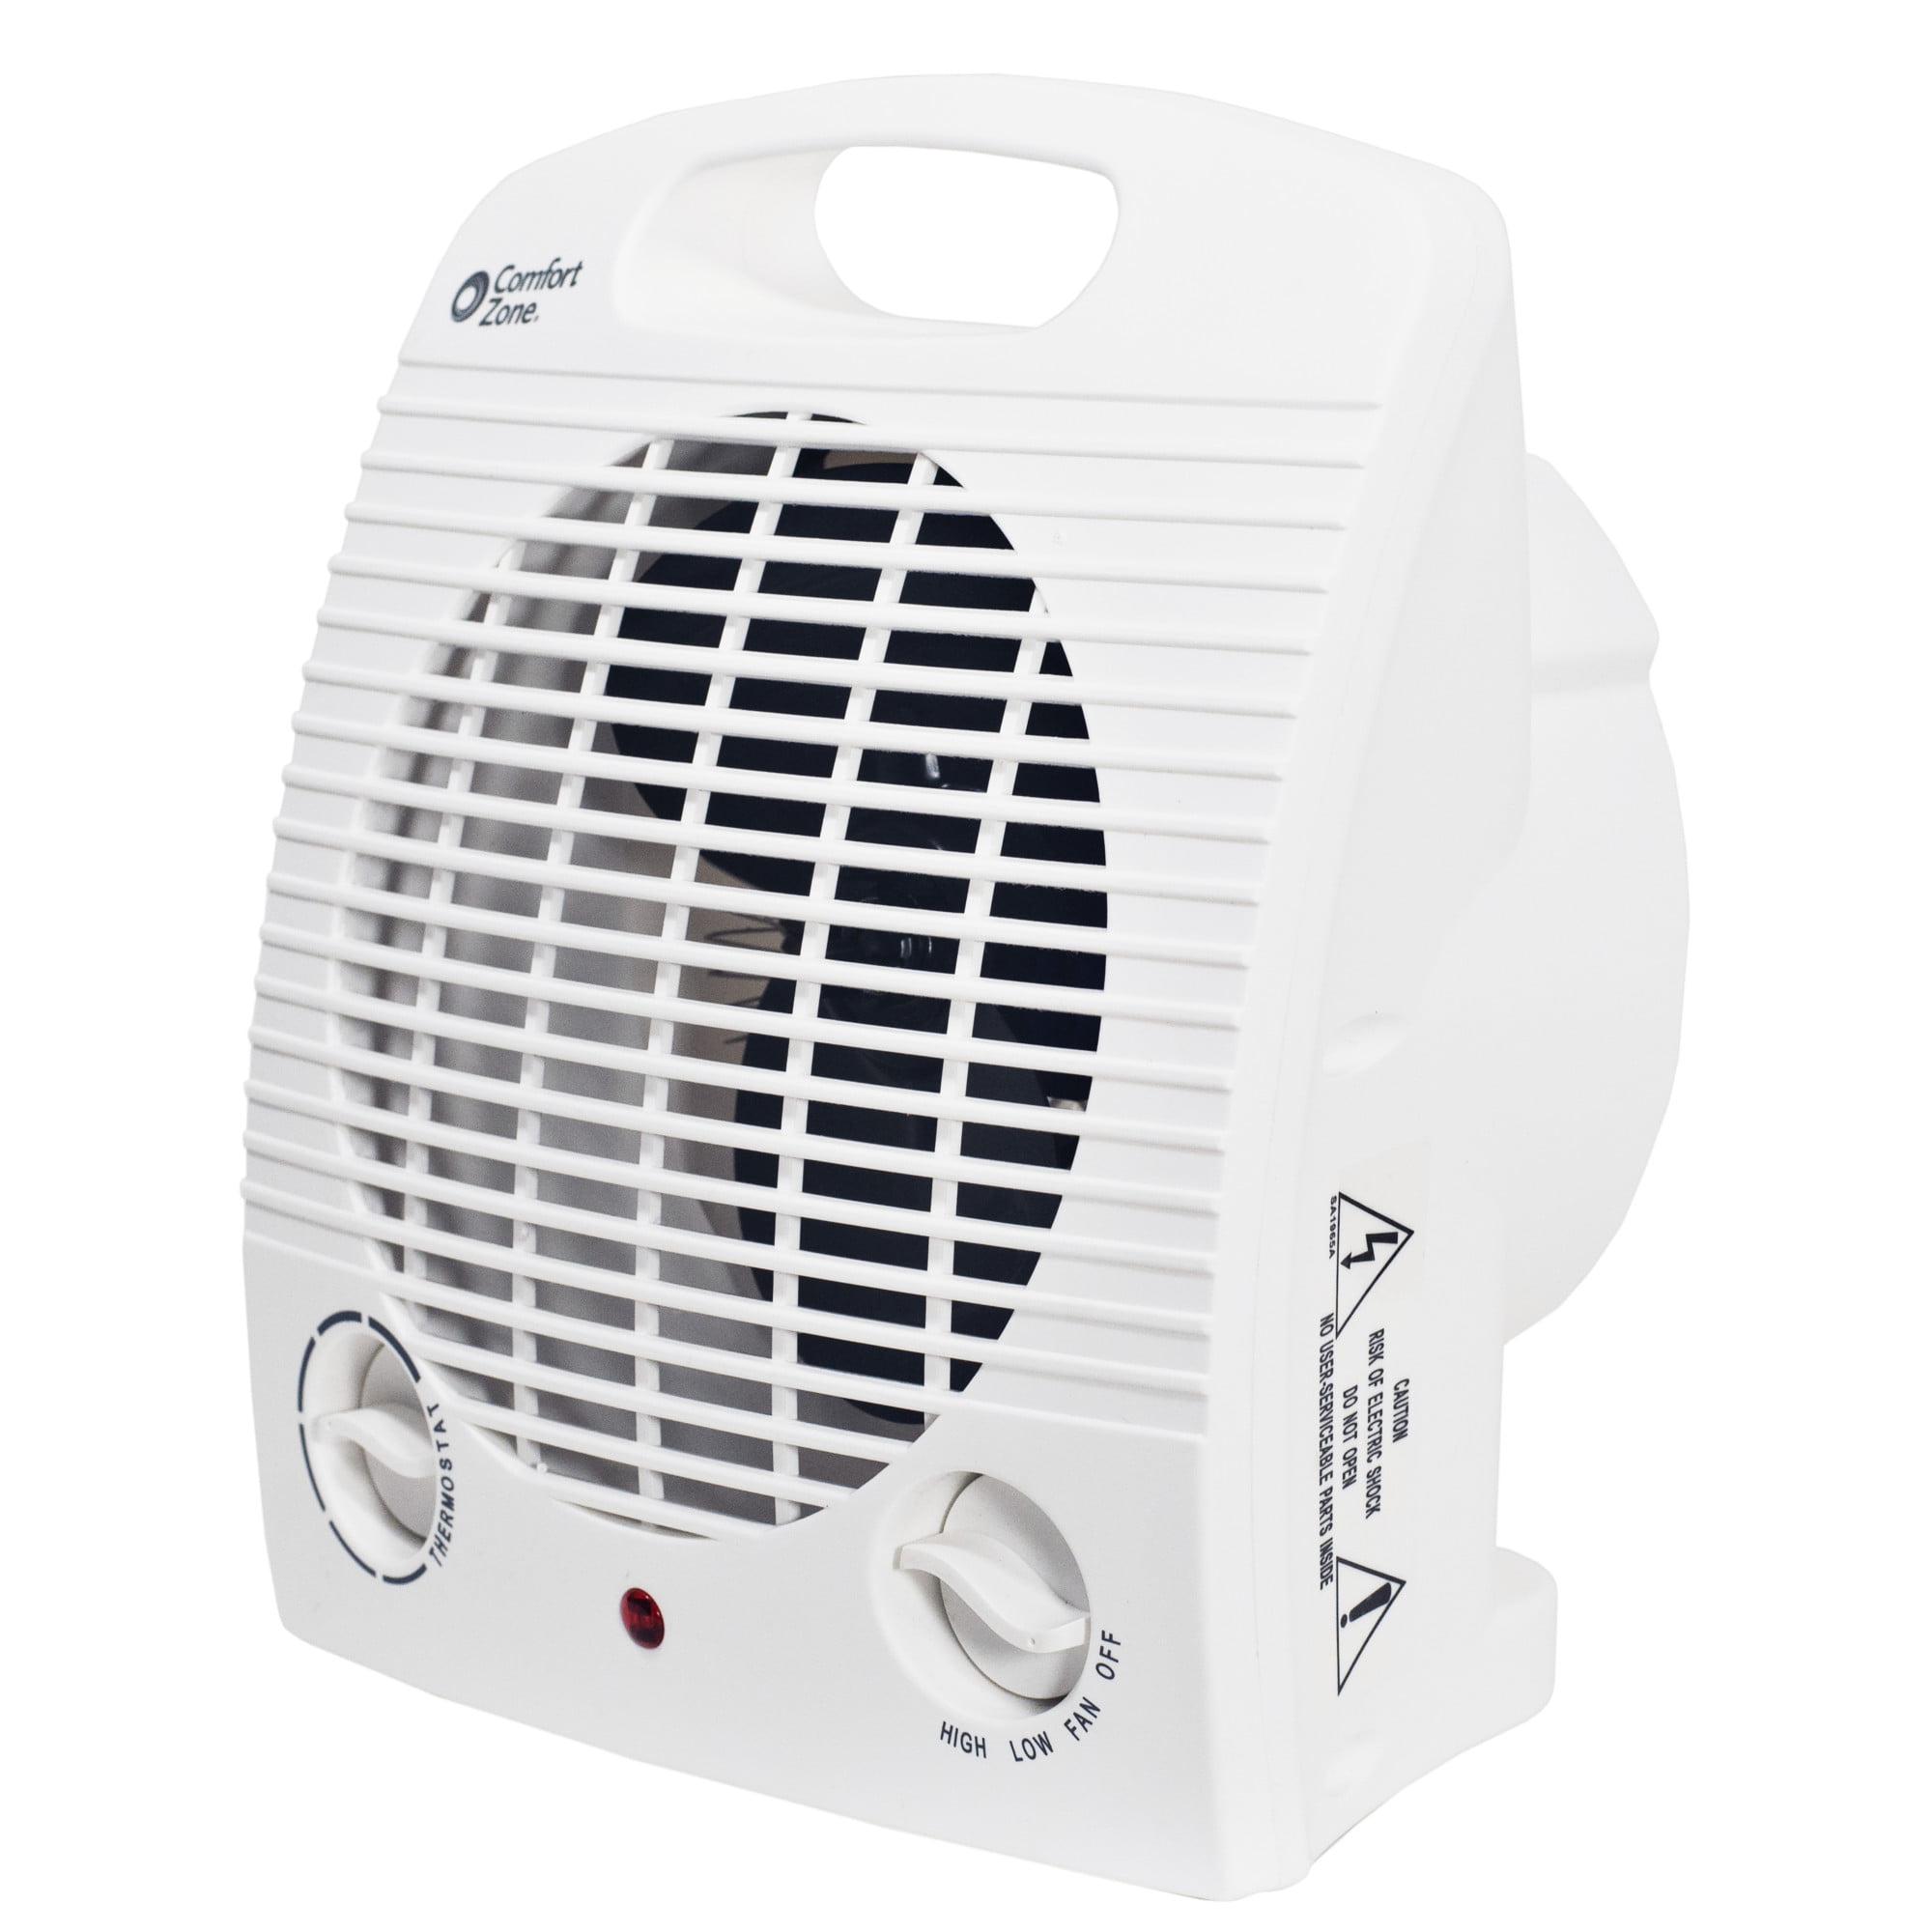 Comfort Zone CZ35 Compact 1500 Watt Portable Fan Space Heater with Thermometer 